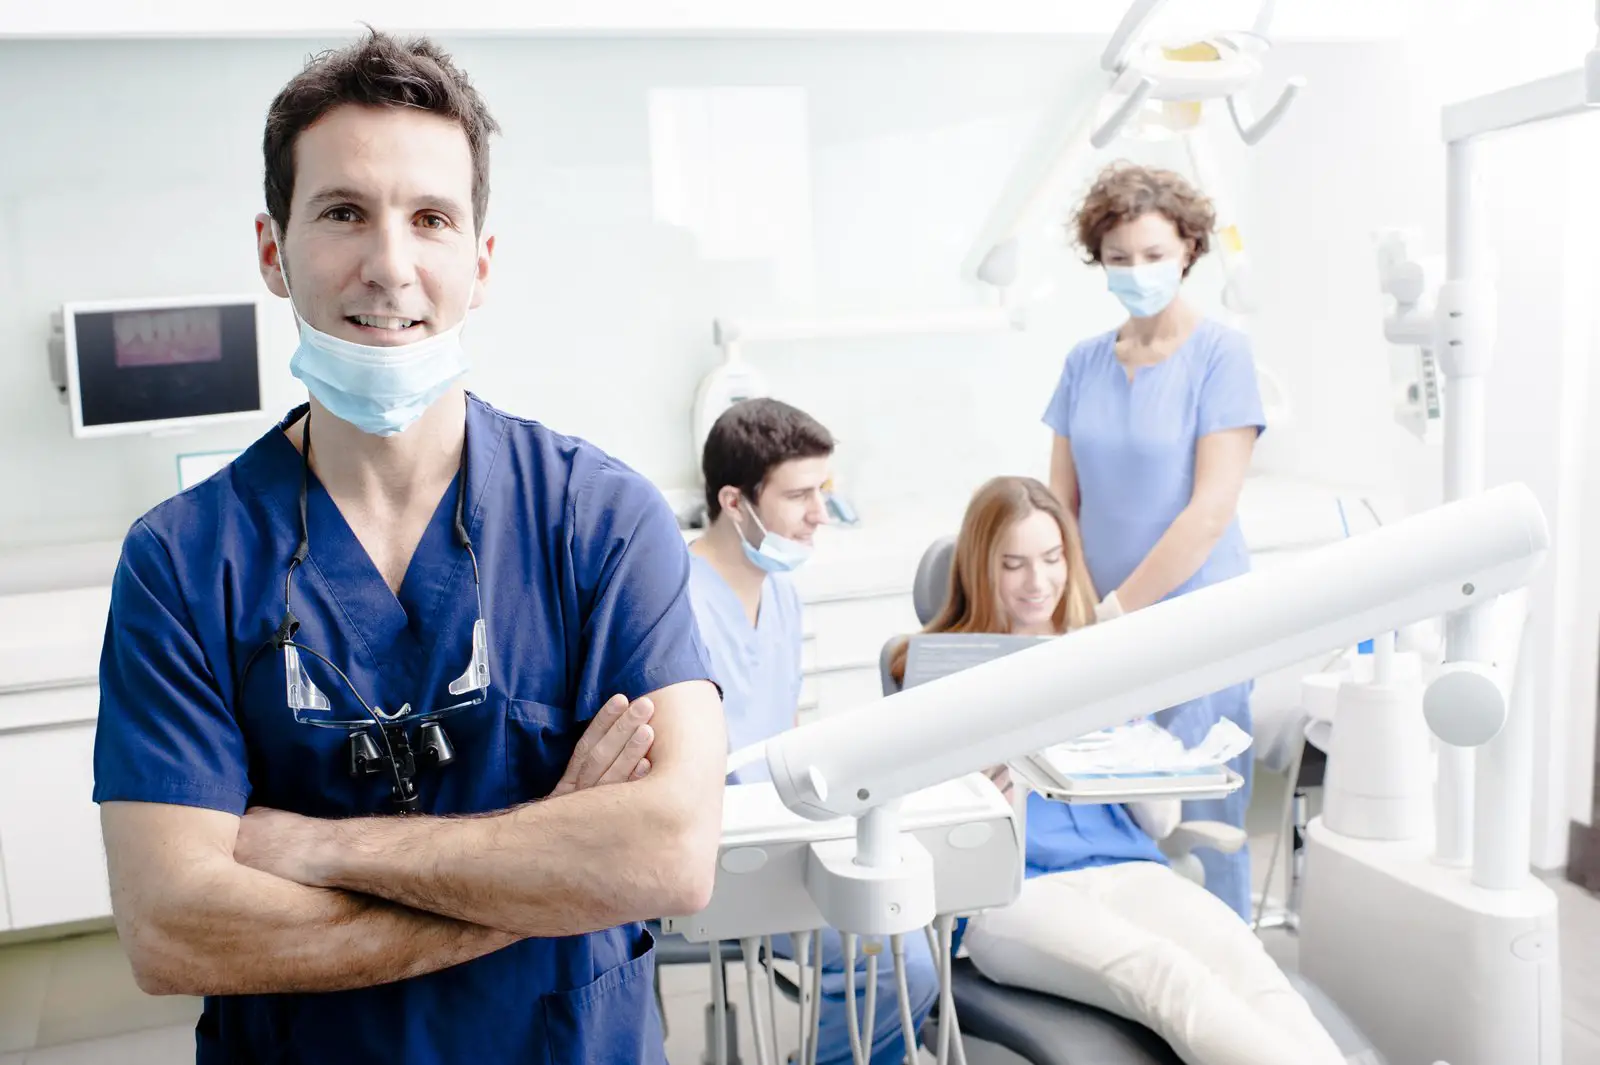 Private dentists are more motivated than NHS dentists